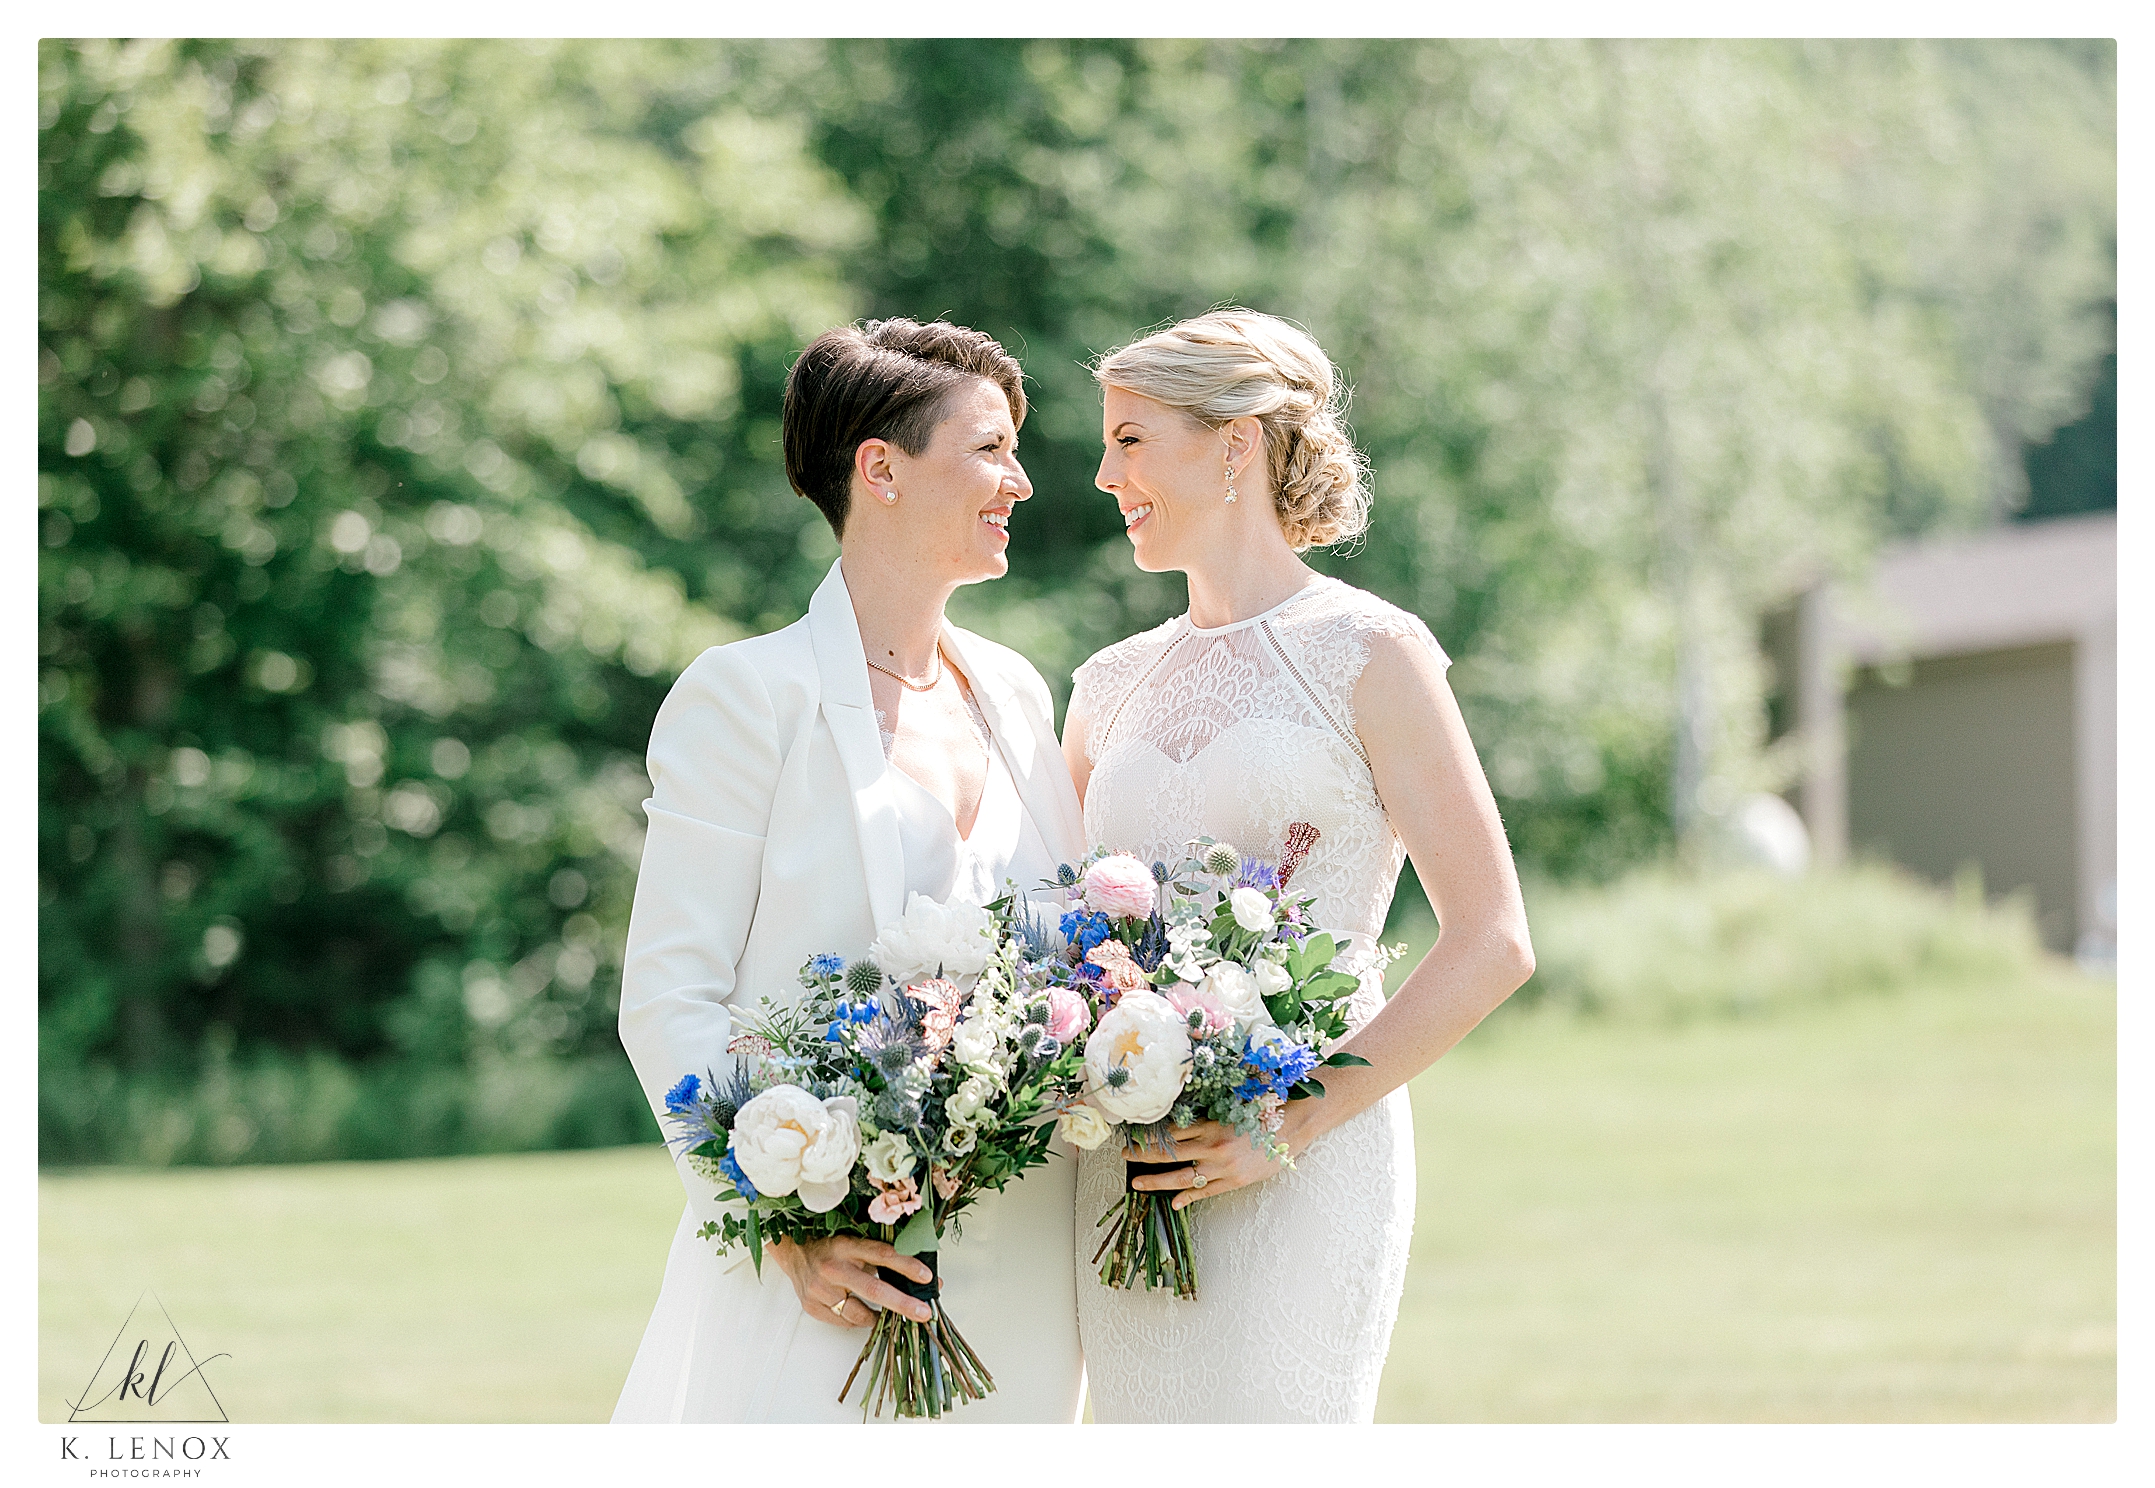 Two brides at their Summer wedding at Mount Sunapee